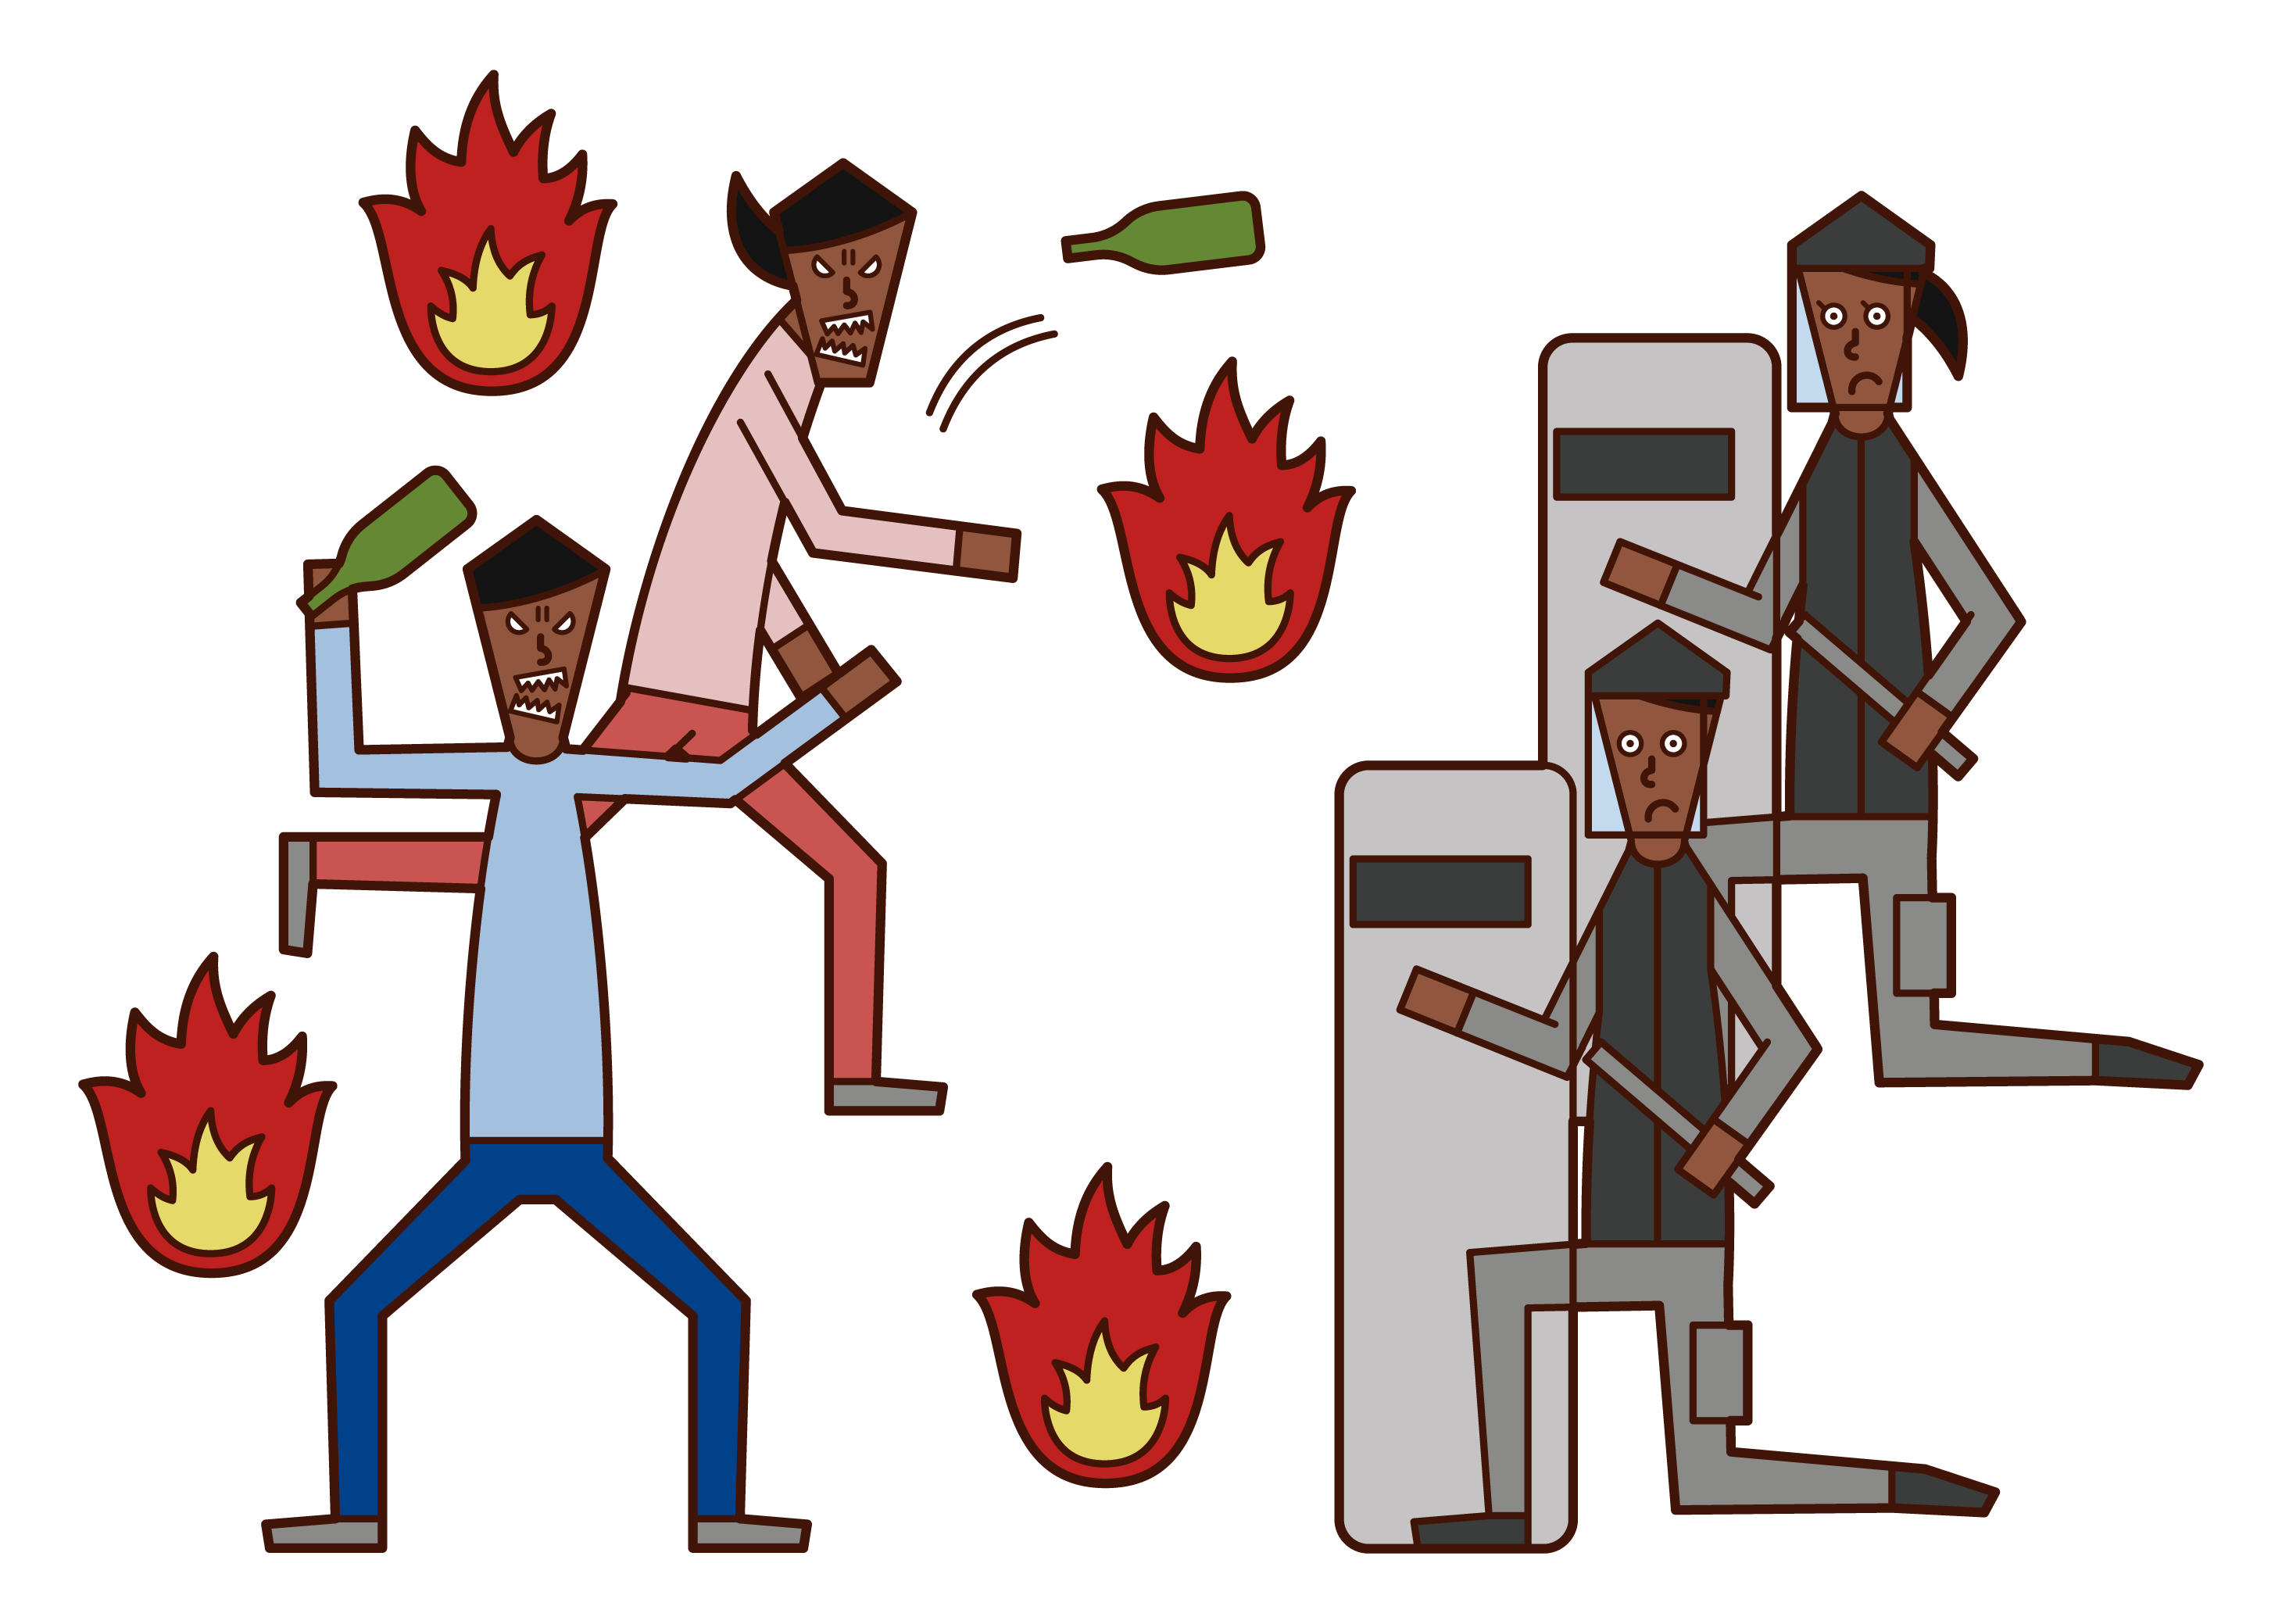 Illustration of a mob-turned-protester